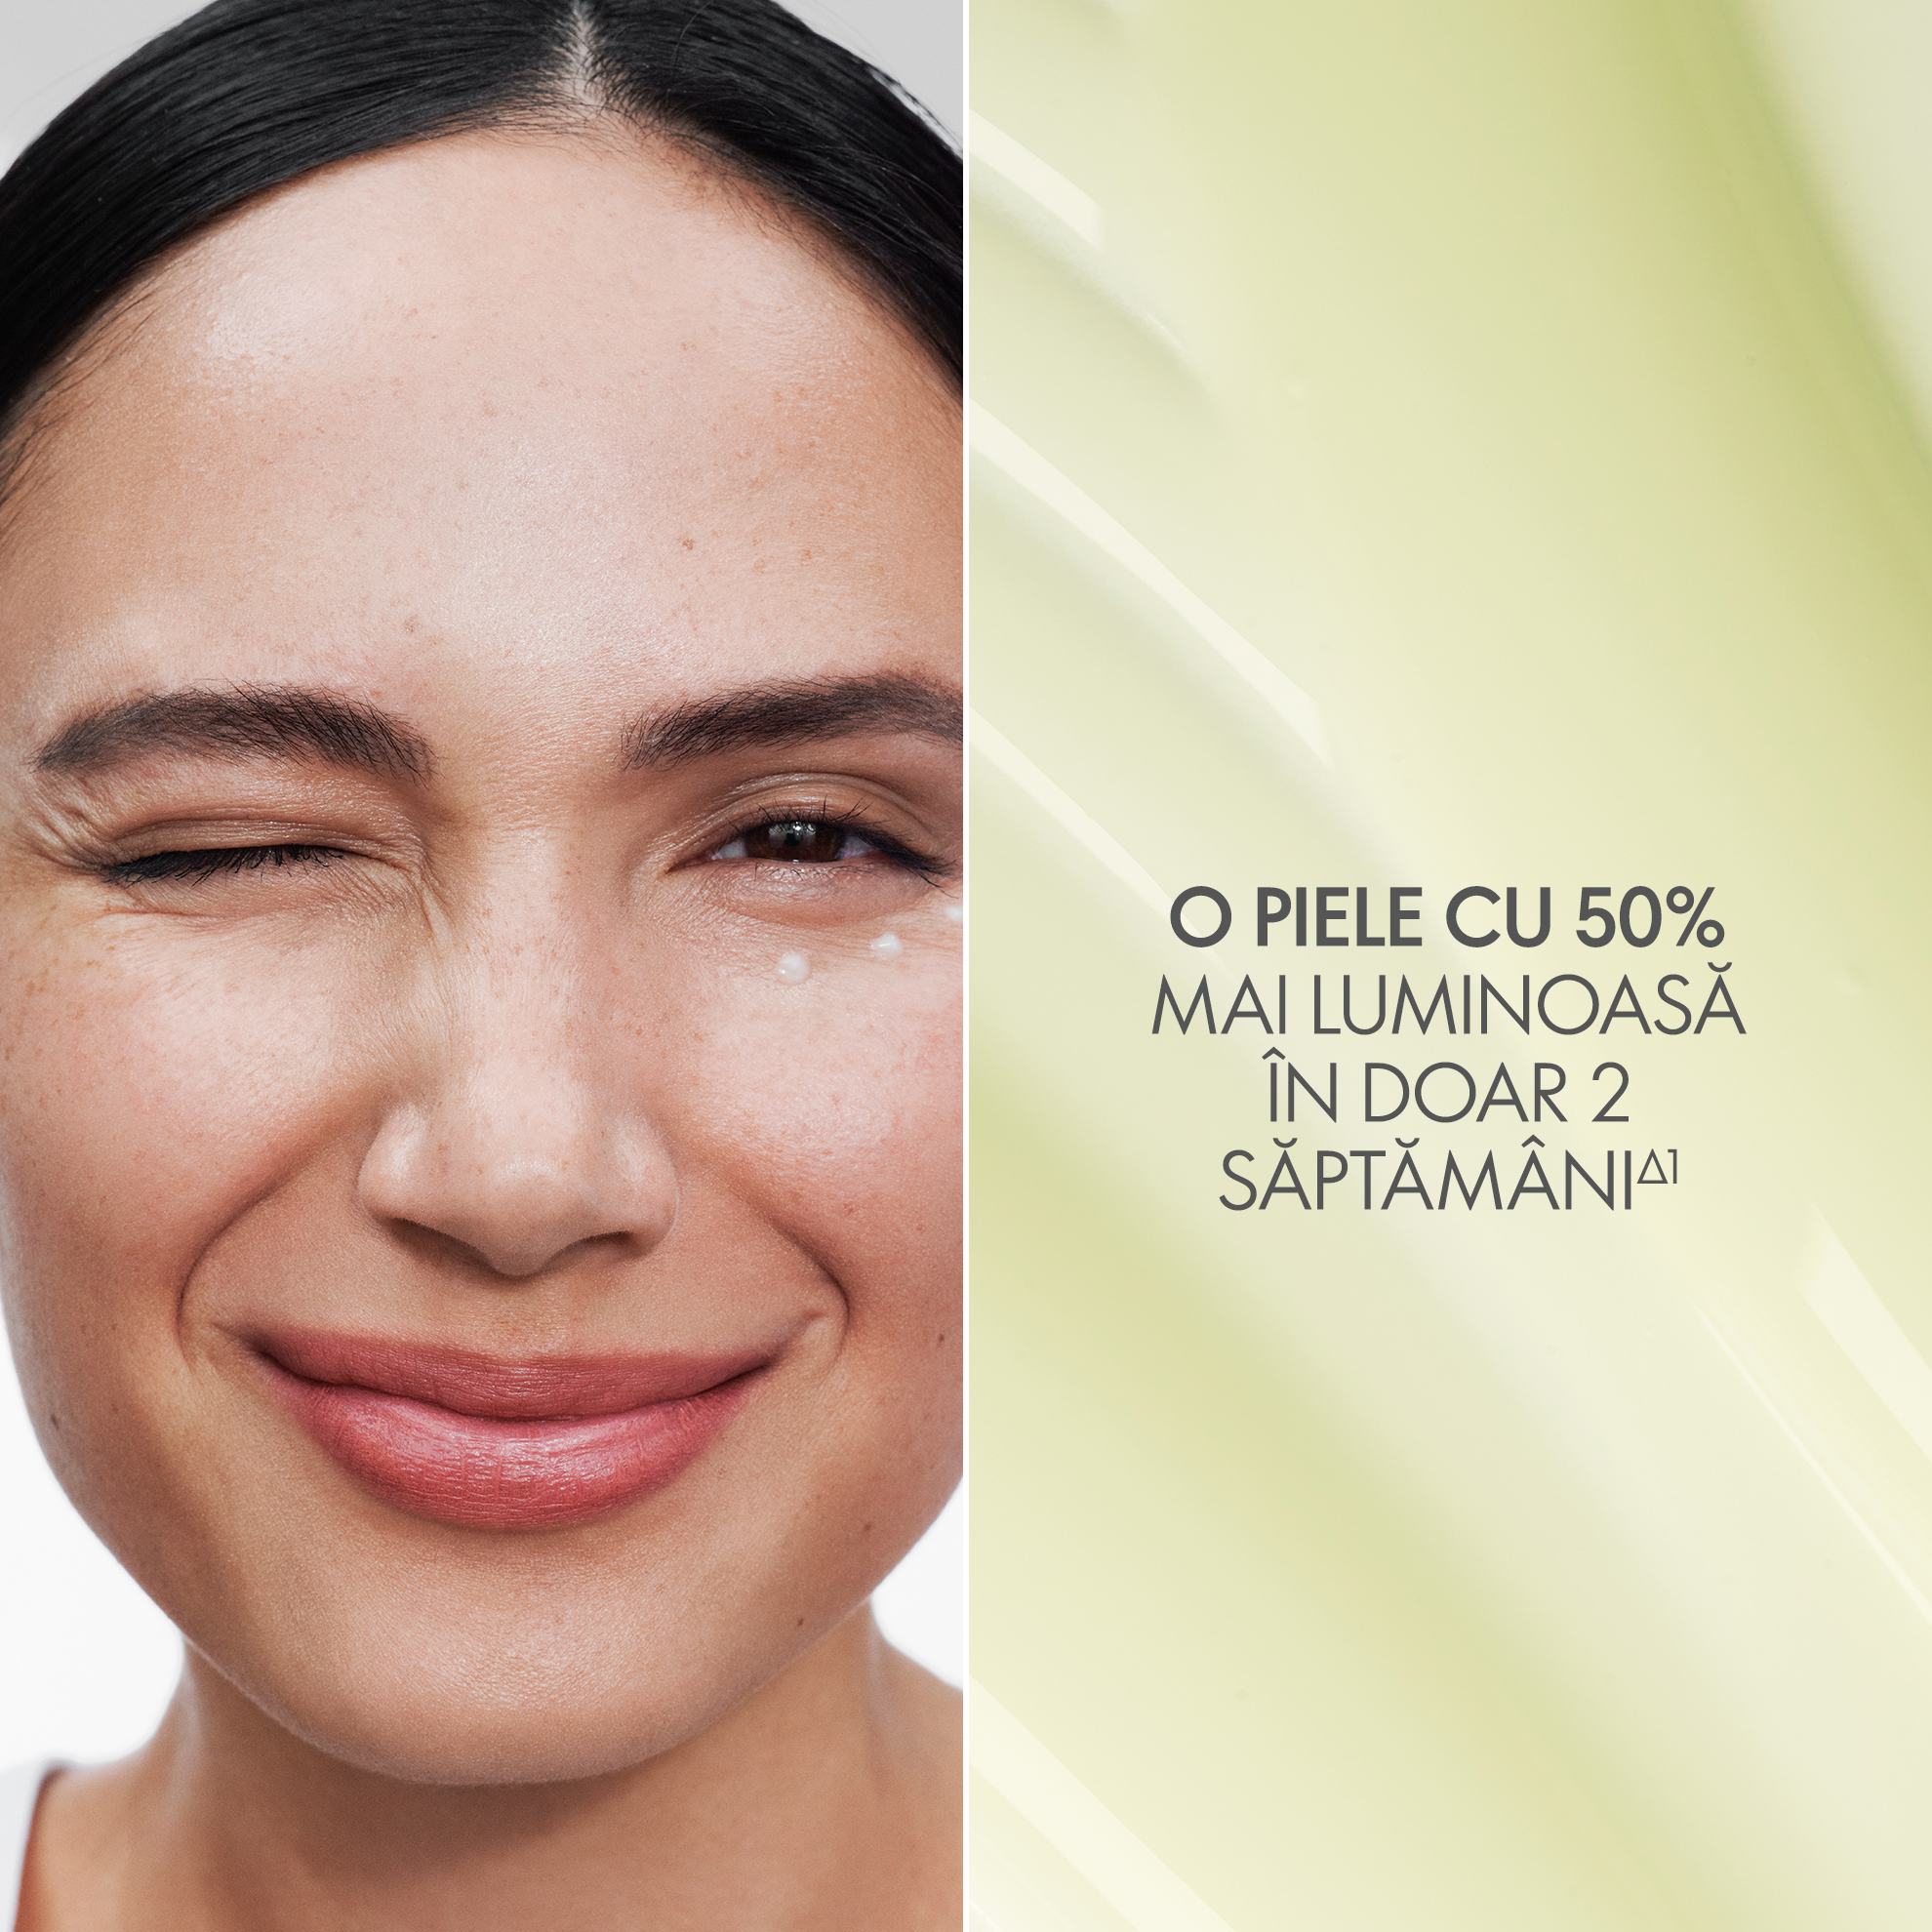 https://media-cdn.oriflame.com/productImage?externalMediaId=product-management-media%2fProducts%2f45595%2fMD%2f45595_2.png&id=17664439&version=1